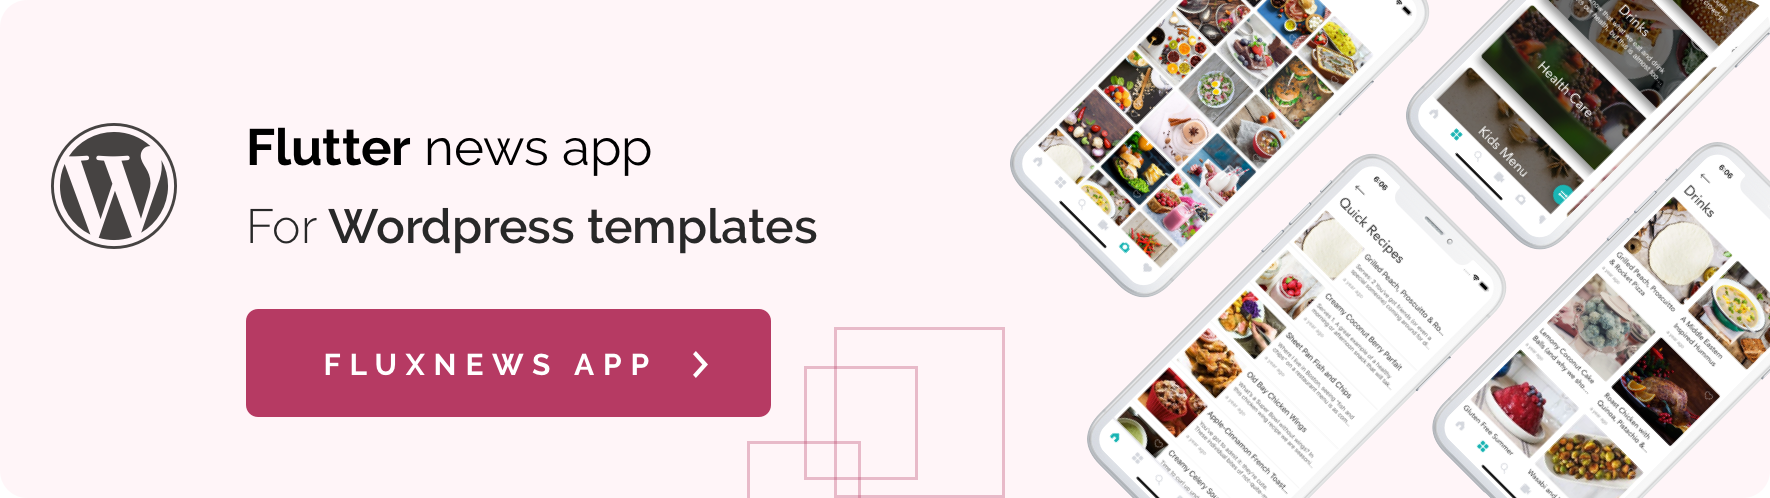 MStore Multi Vendor - Complete React Native template for WooCommerce - 28